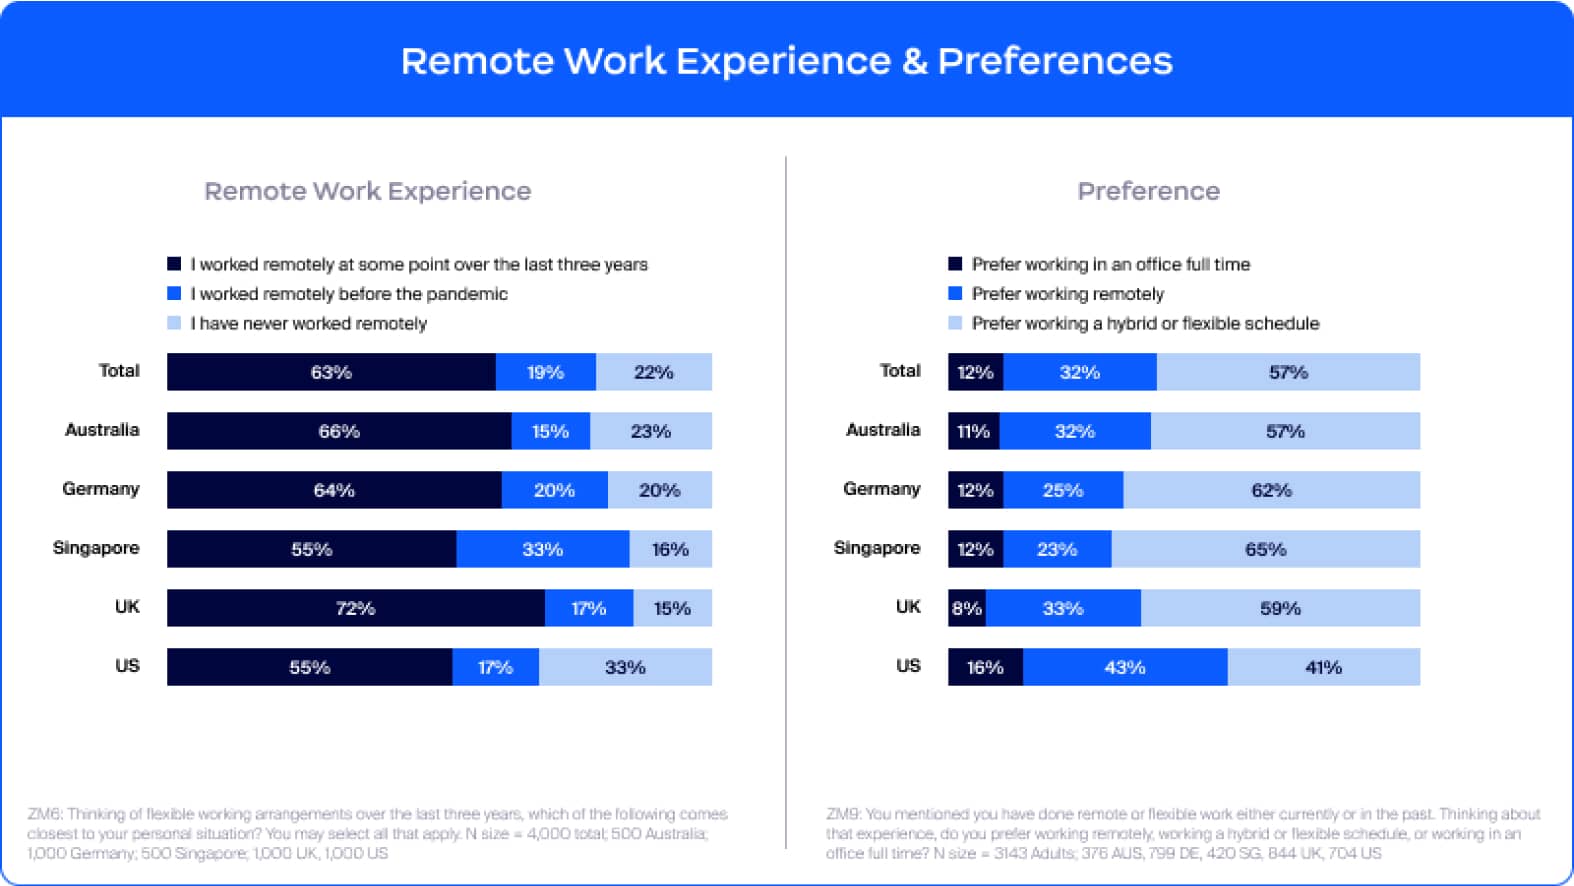 Remote Work Experience & Preferences